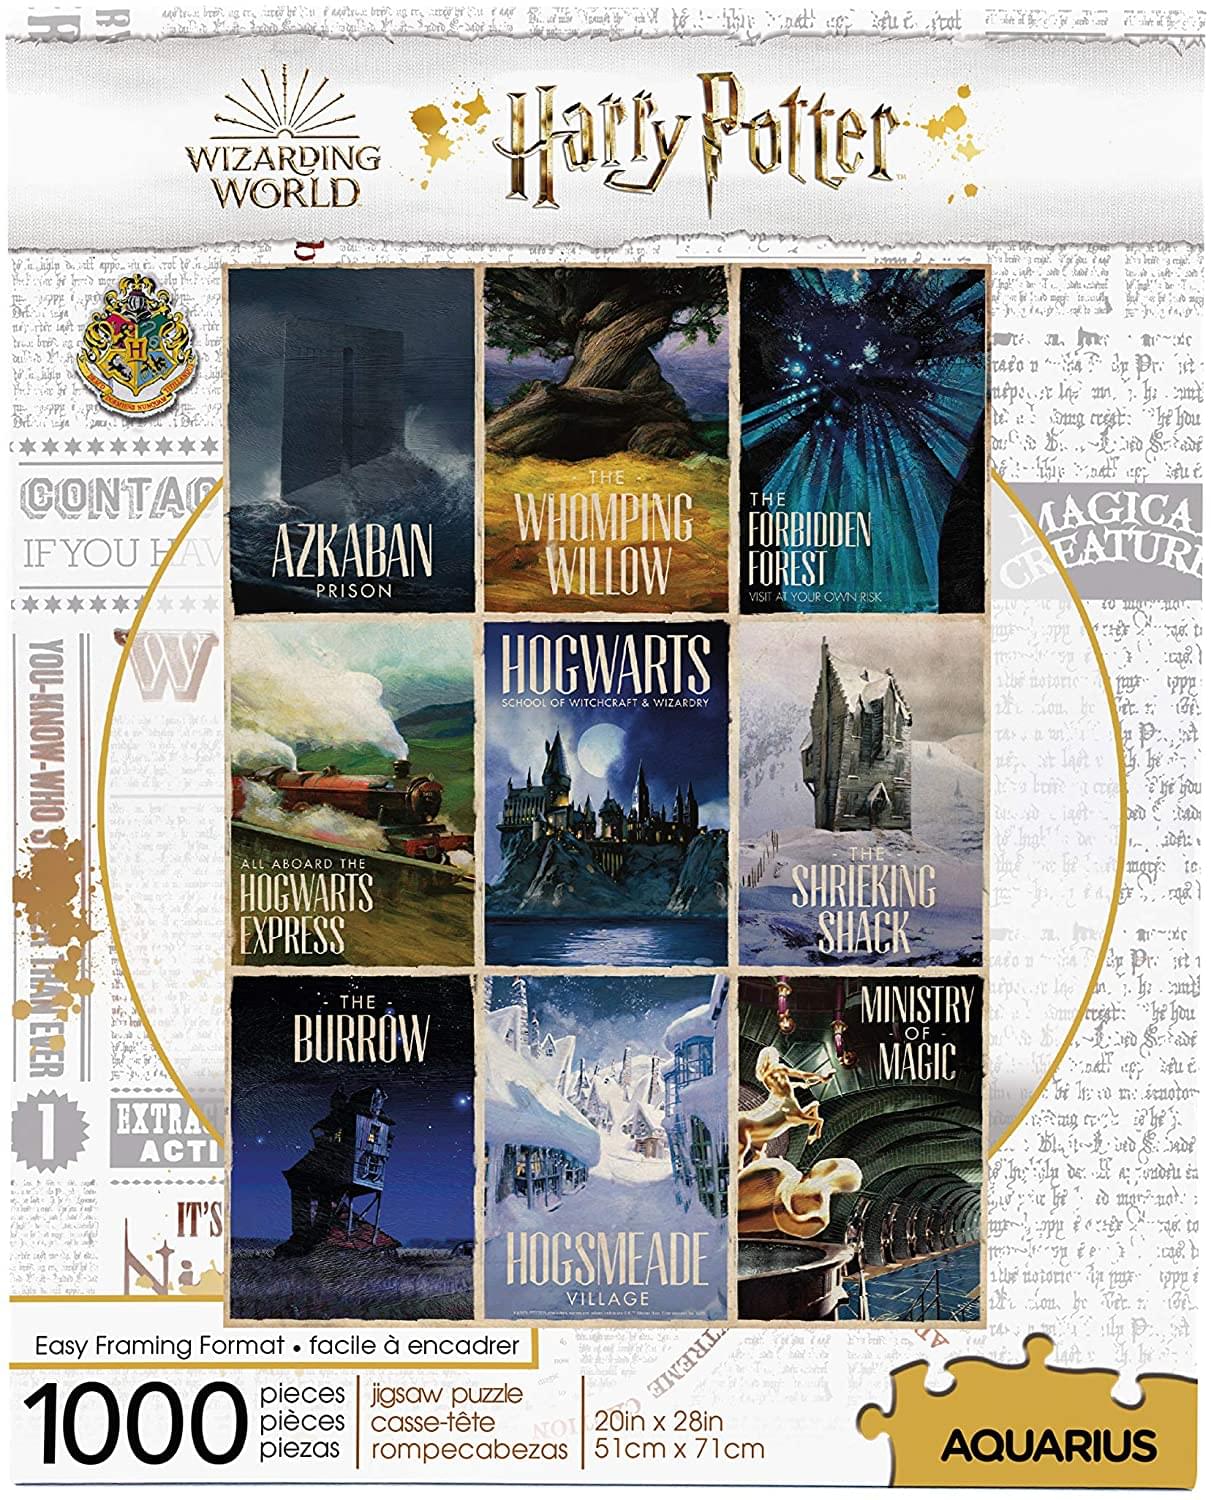 Harry Potter Travel Posters 1000 Piece Jigsaw Puzzle